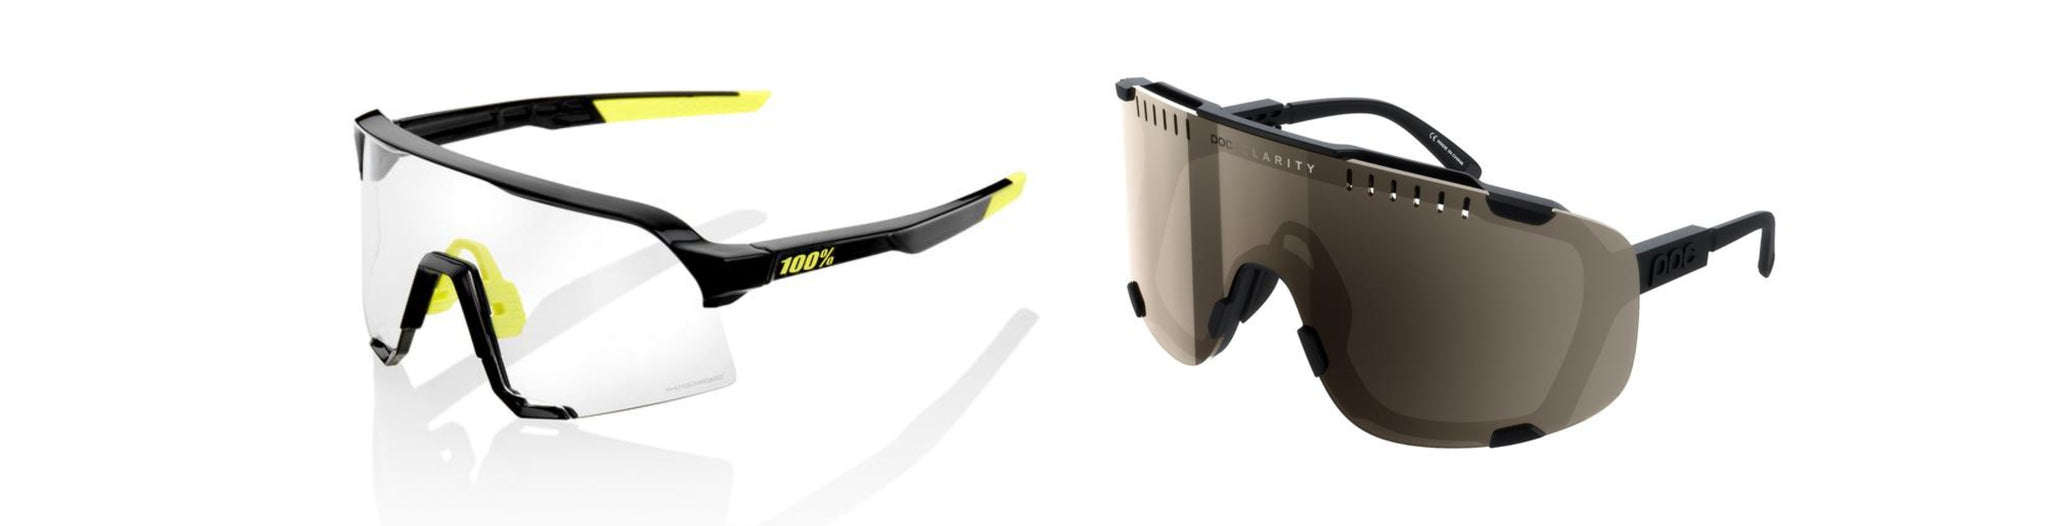 MTB Holiday gift guide sunglasses